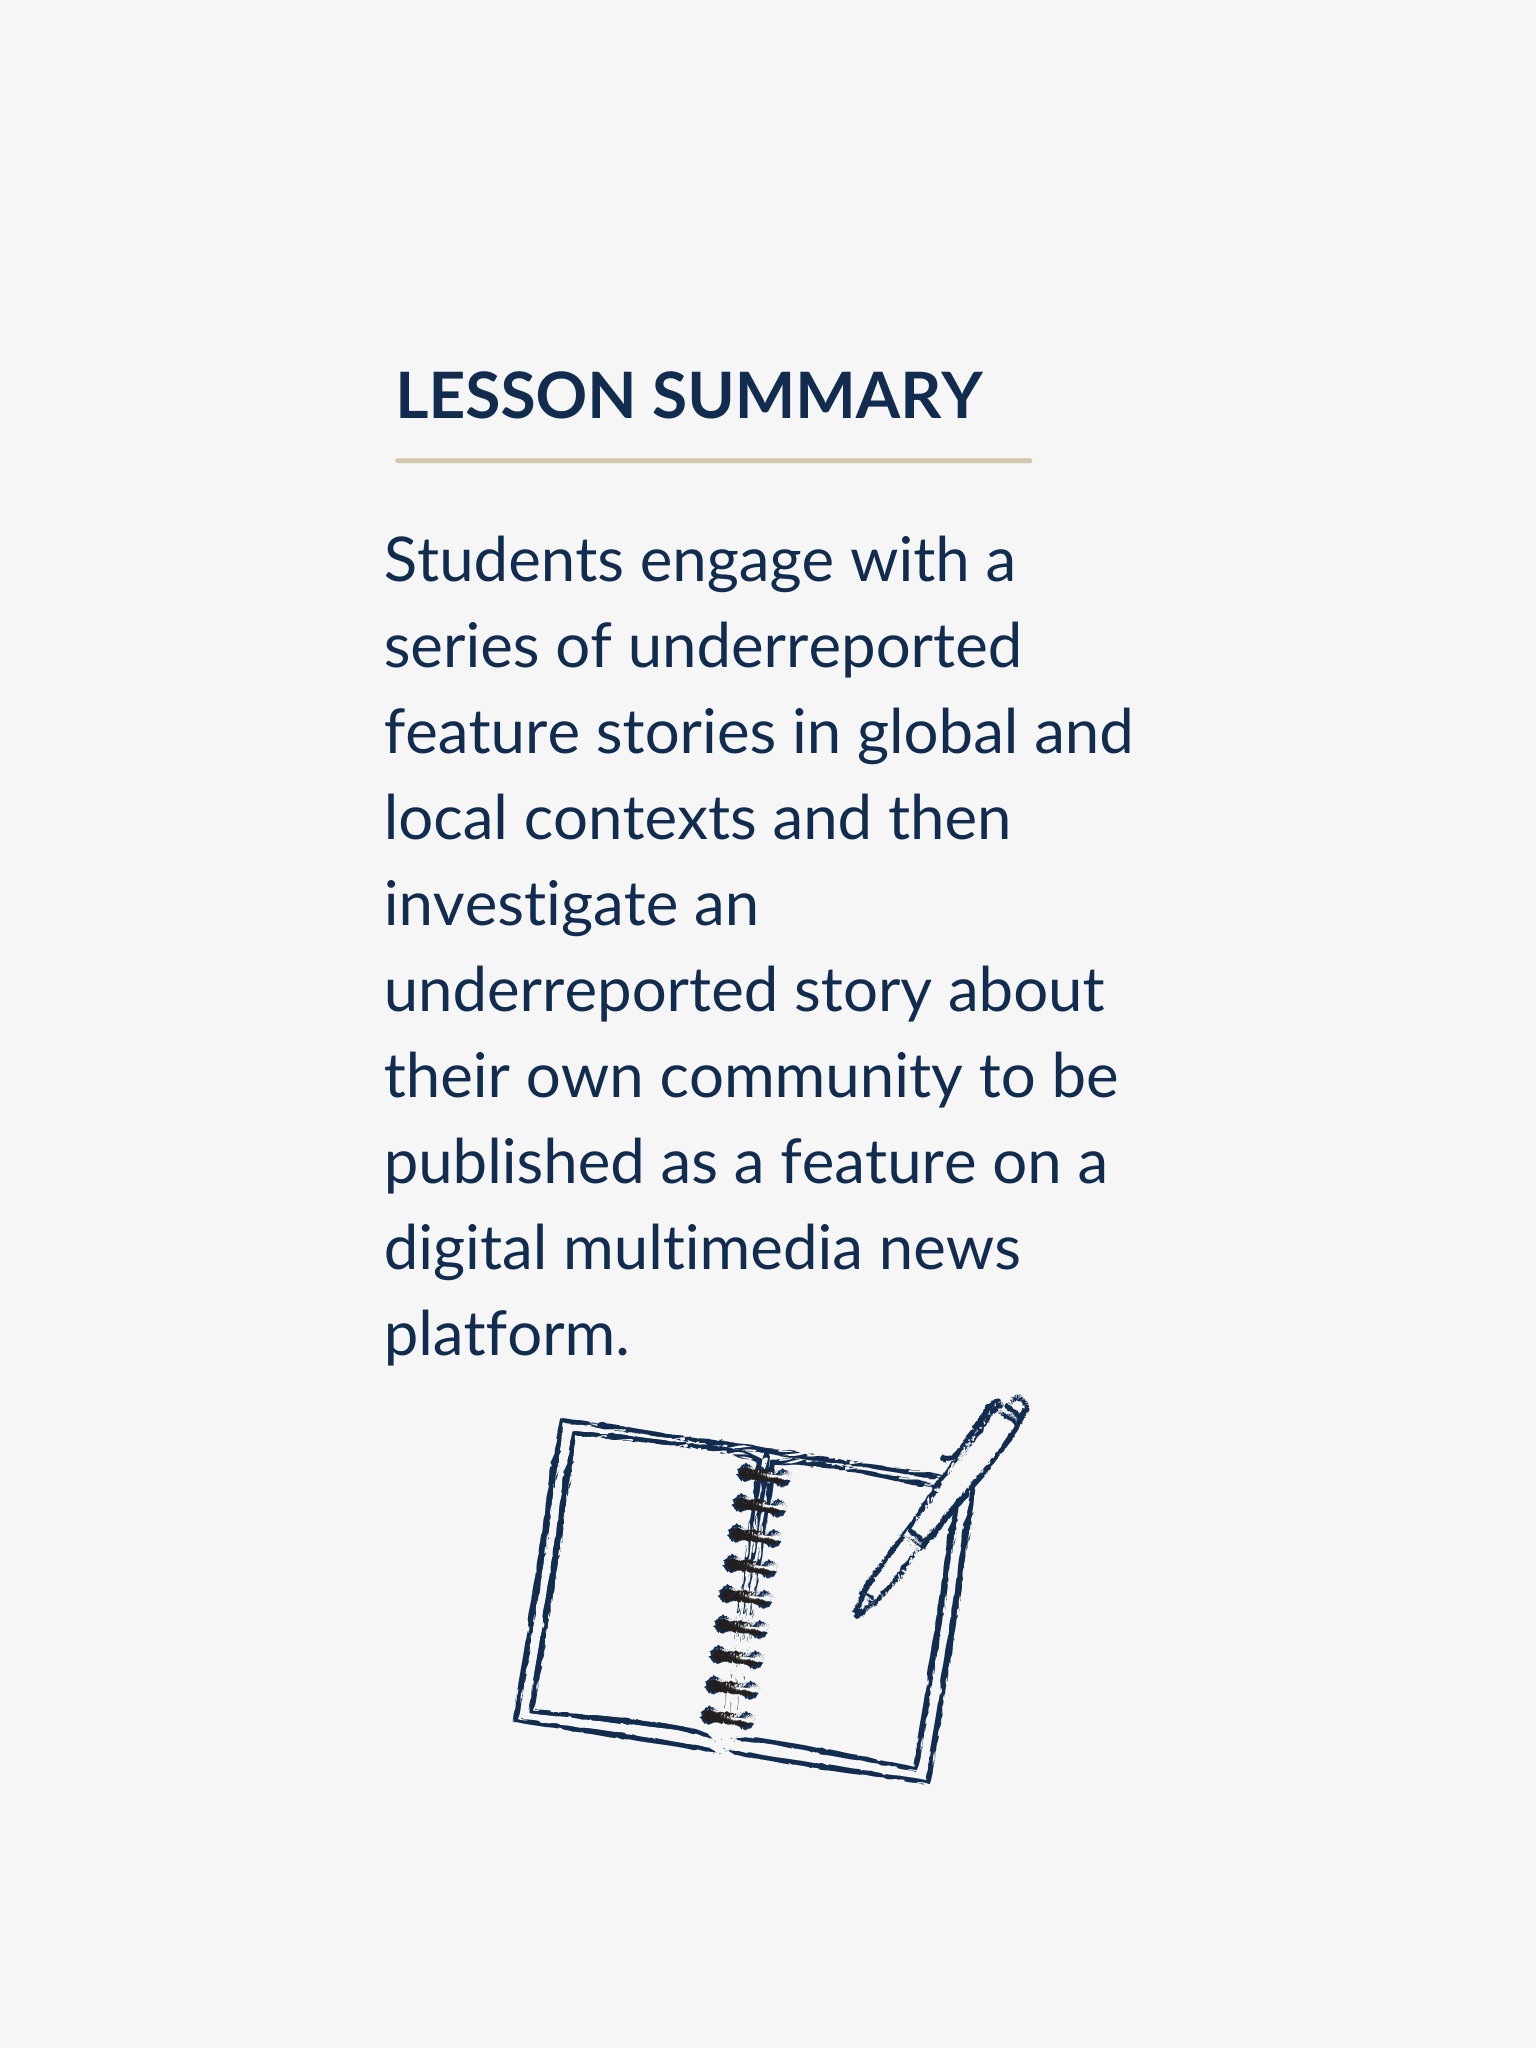 https://pulitzercenter.org/sites/default/files/2022-08/%20K-12%20Lesson%20Summary%20Template%2014_2.png